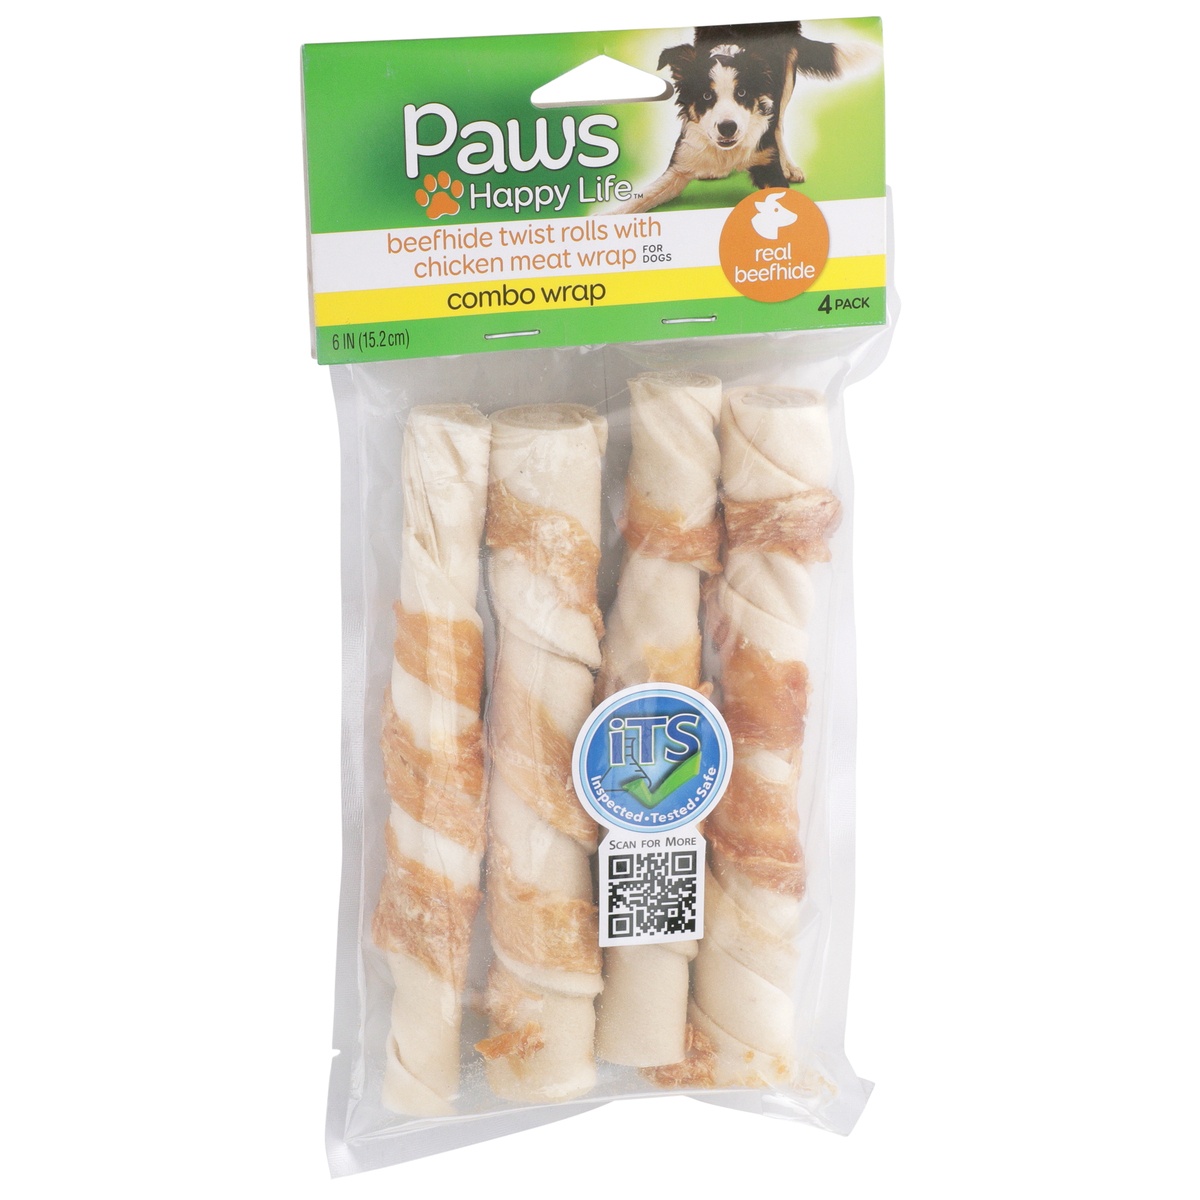 slide 2 of 8, Paws Happy Life Combo Wrap Beefhide Twist Rolls With Chicken Meat Wrap For Dogs, 4 ct